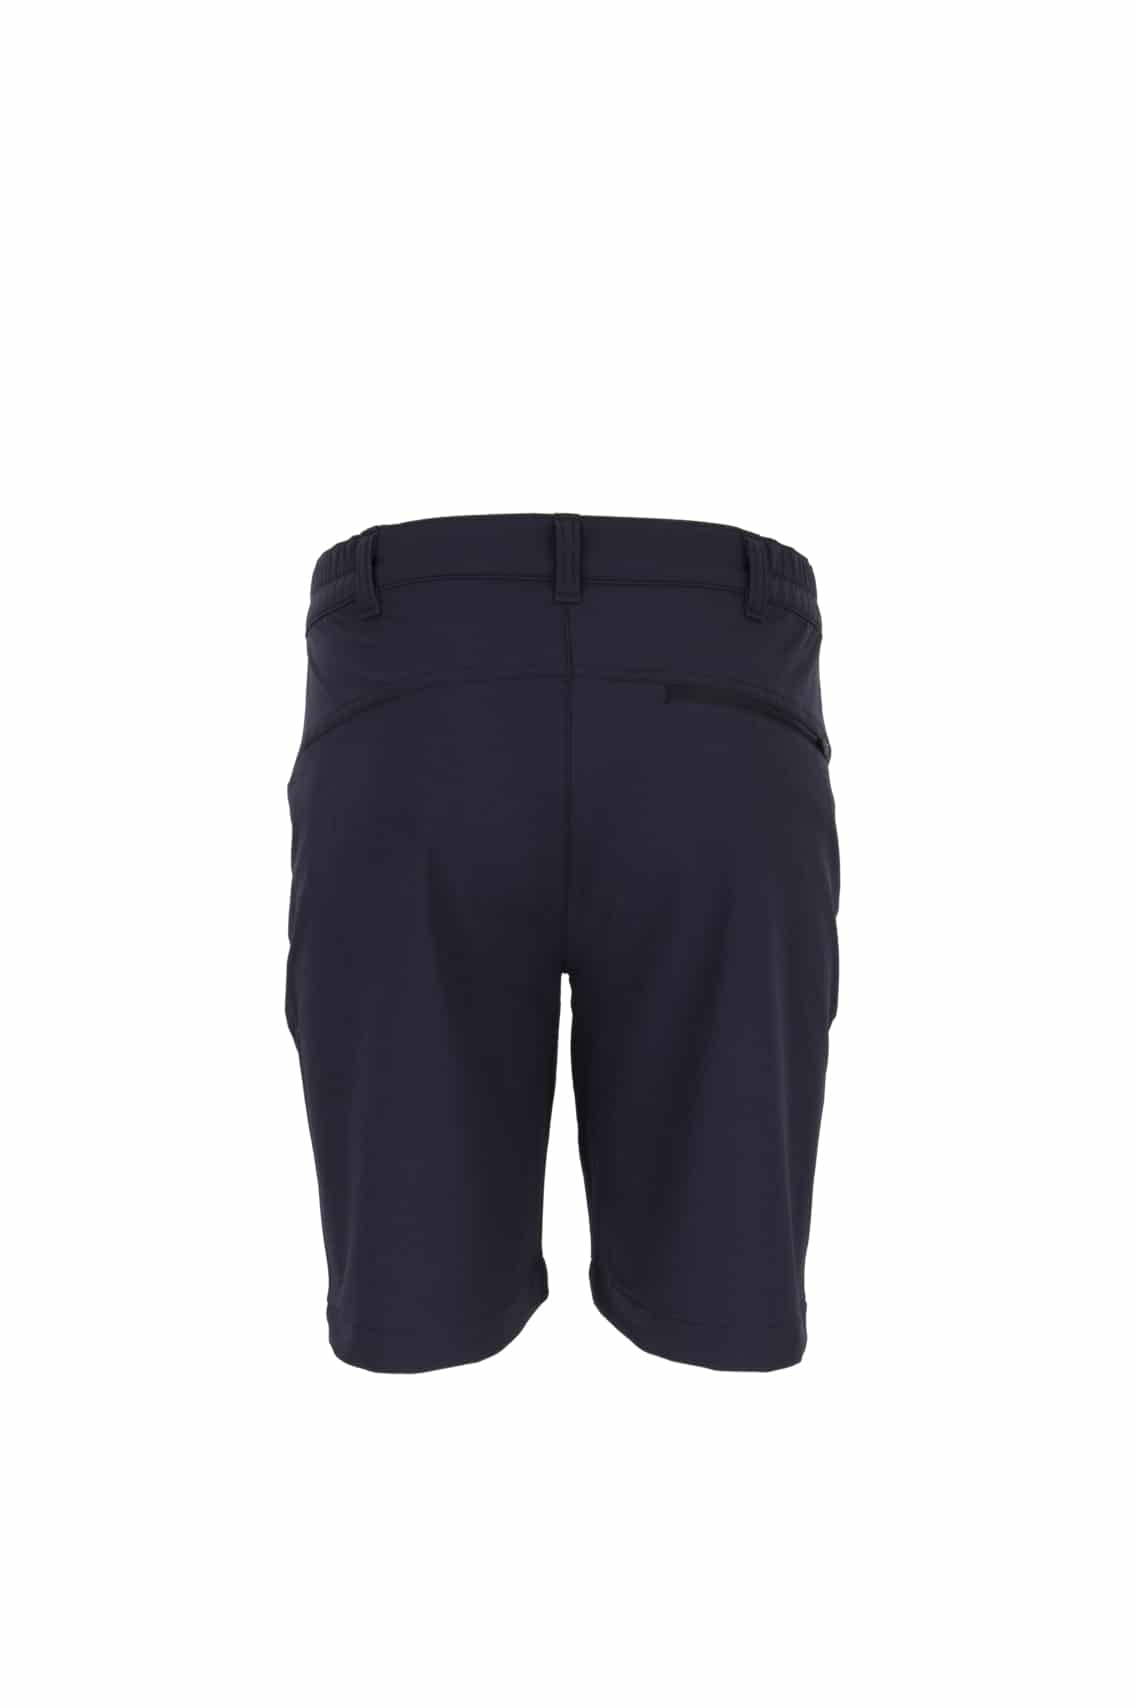 photo of Silverpoint mens ennerdale shorts graphite rear